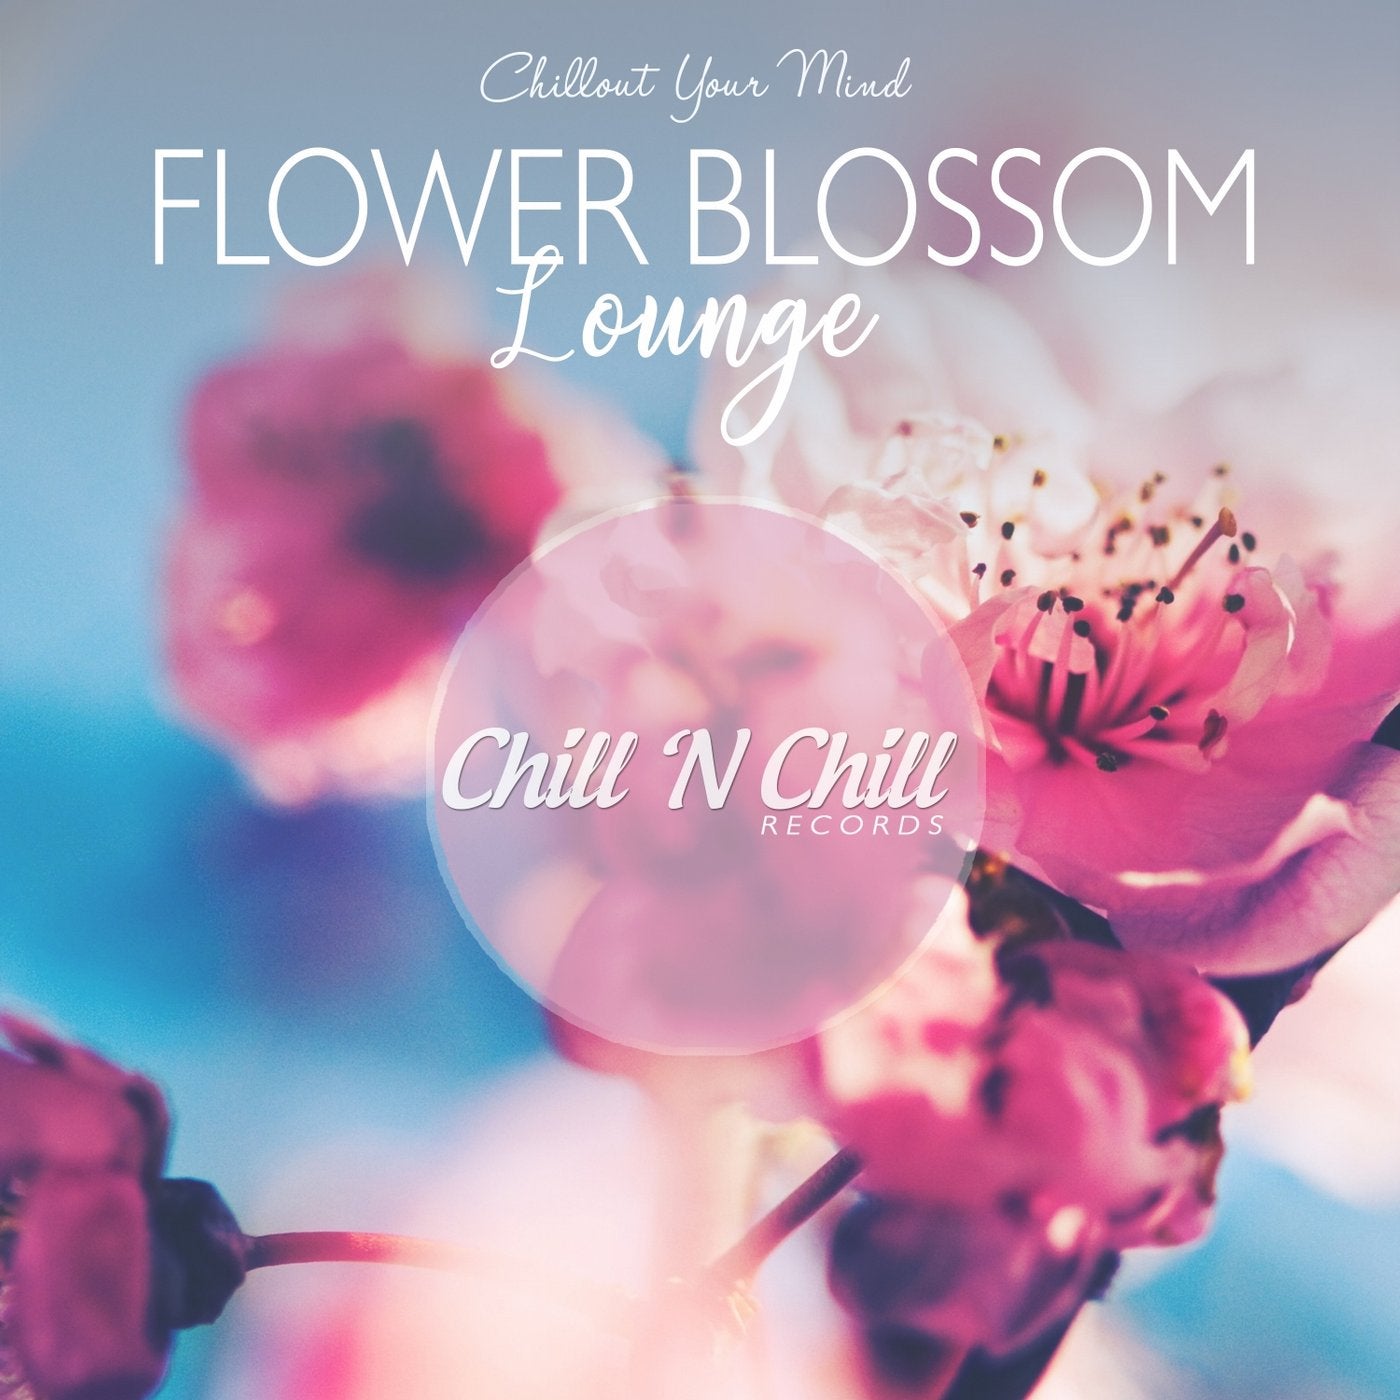 Flower Blossom Lounge (Chillout Your Mind)